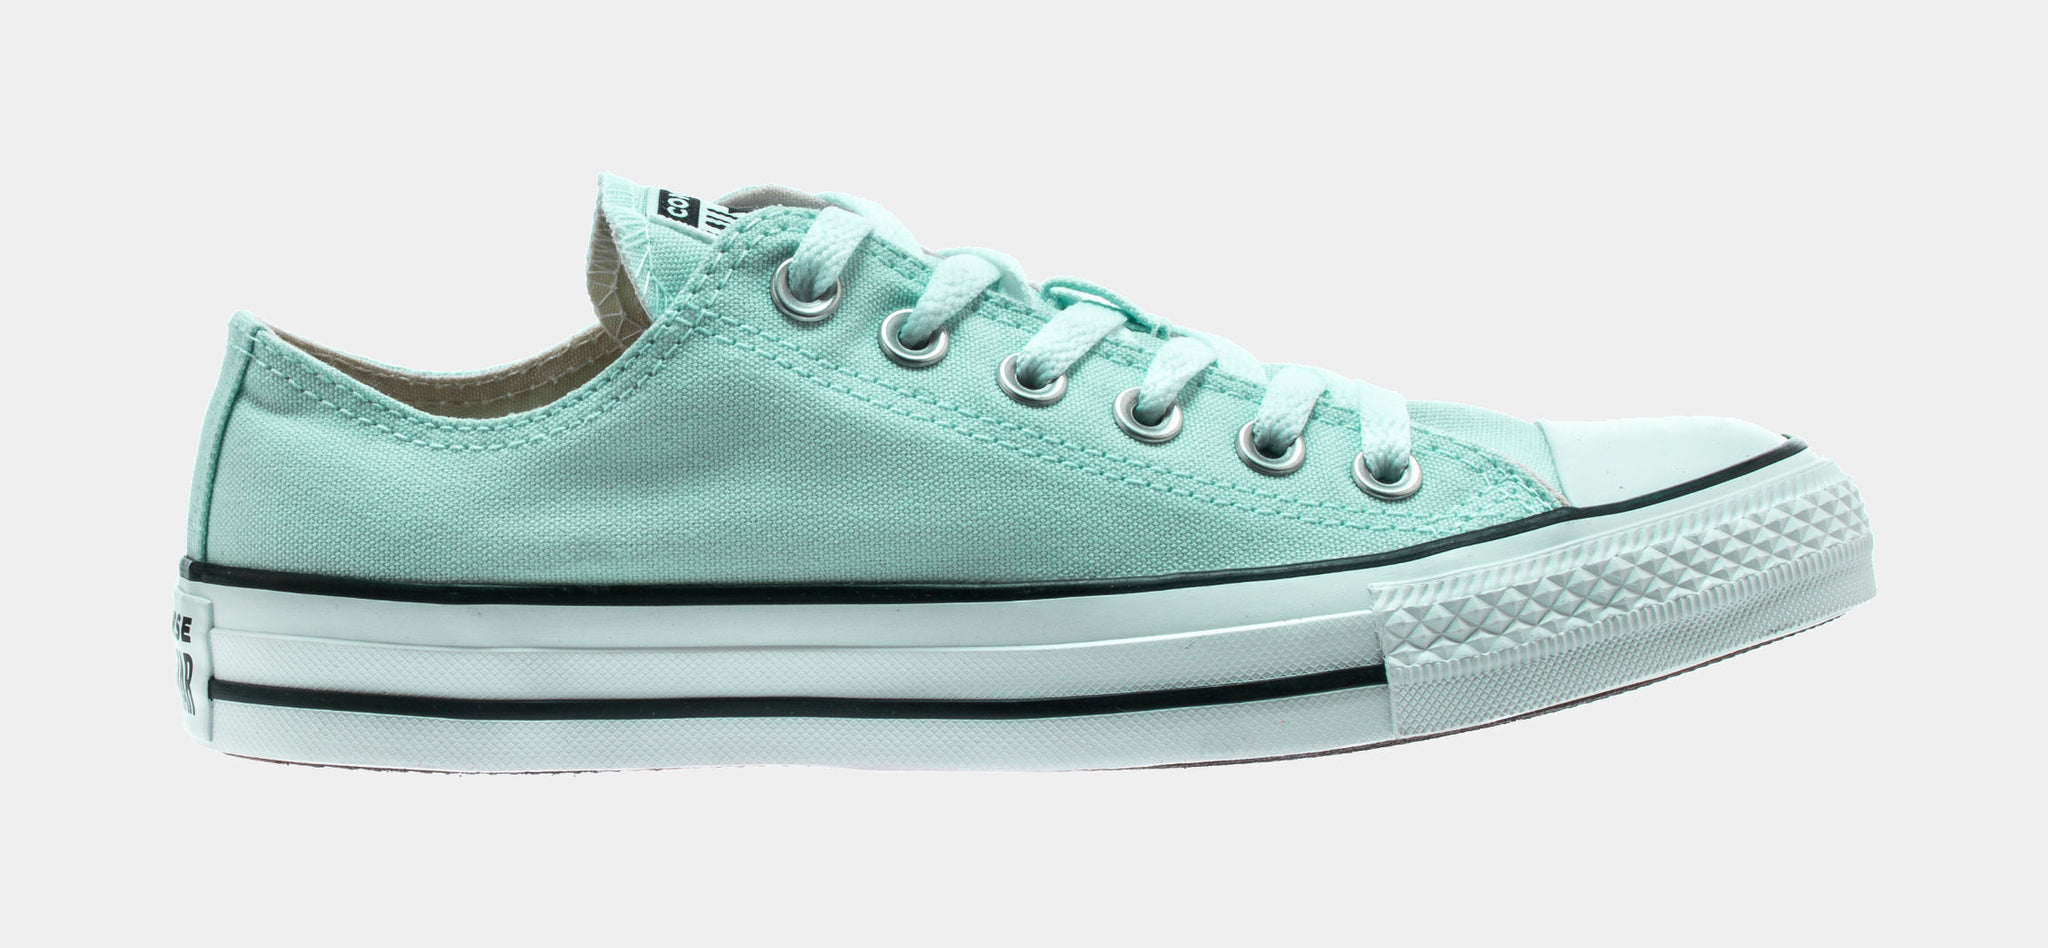 Hovedløse spøgelse Ved daggry Converse All Star OX Mens Lifestyle Shoe Mint Green 163357F – Shoe Palace